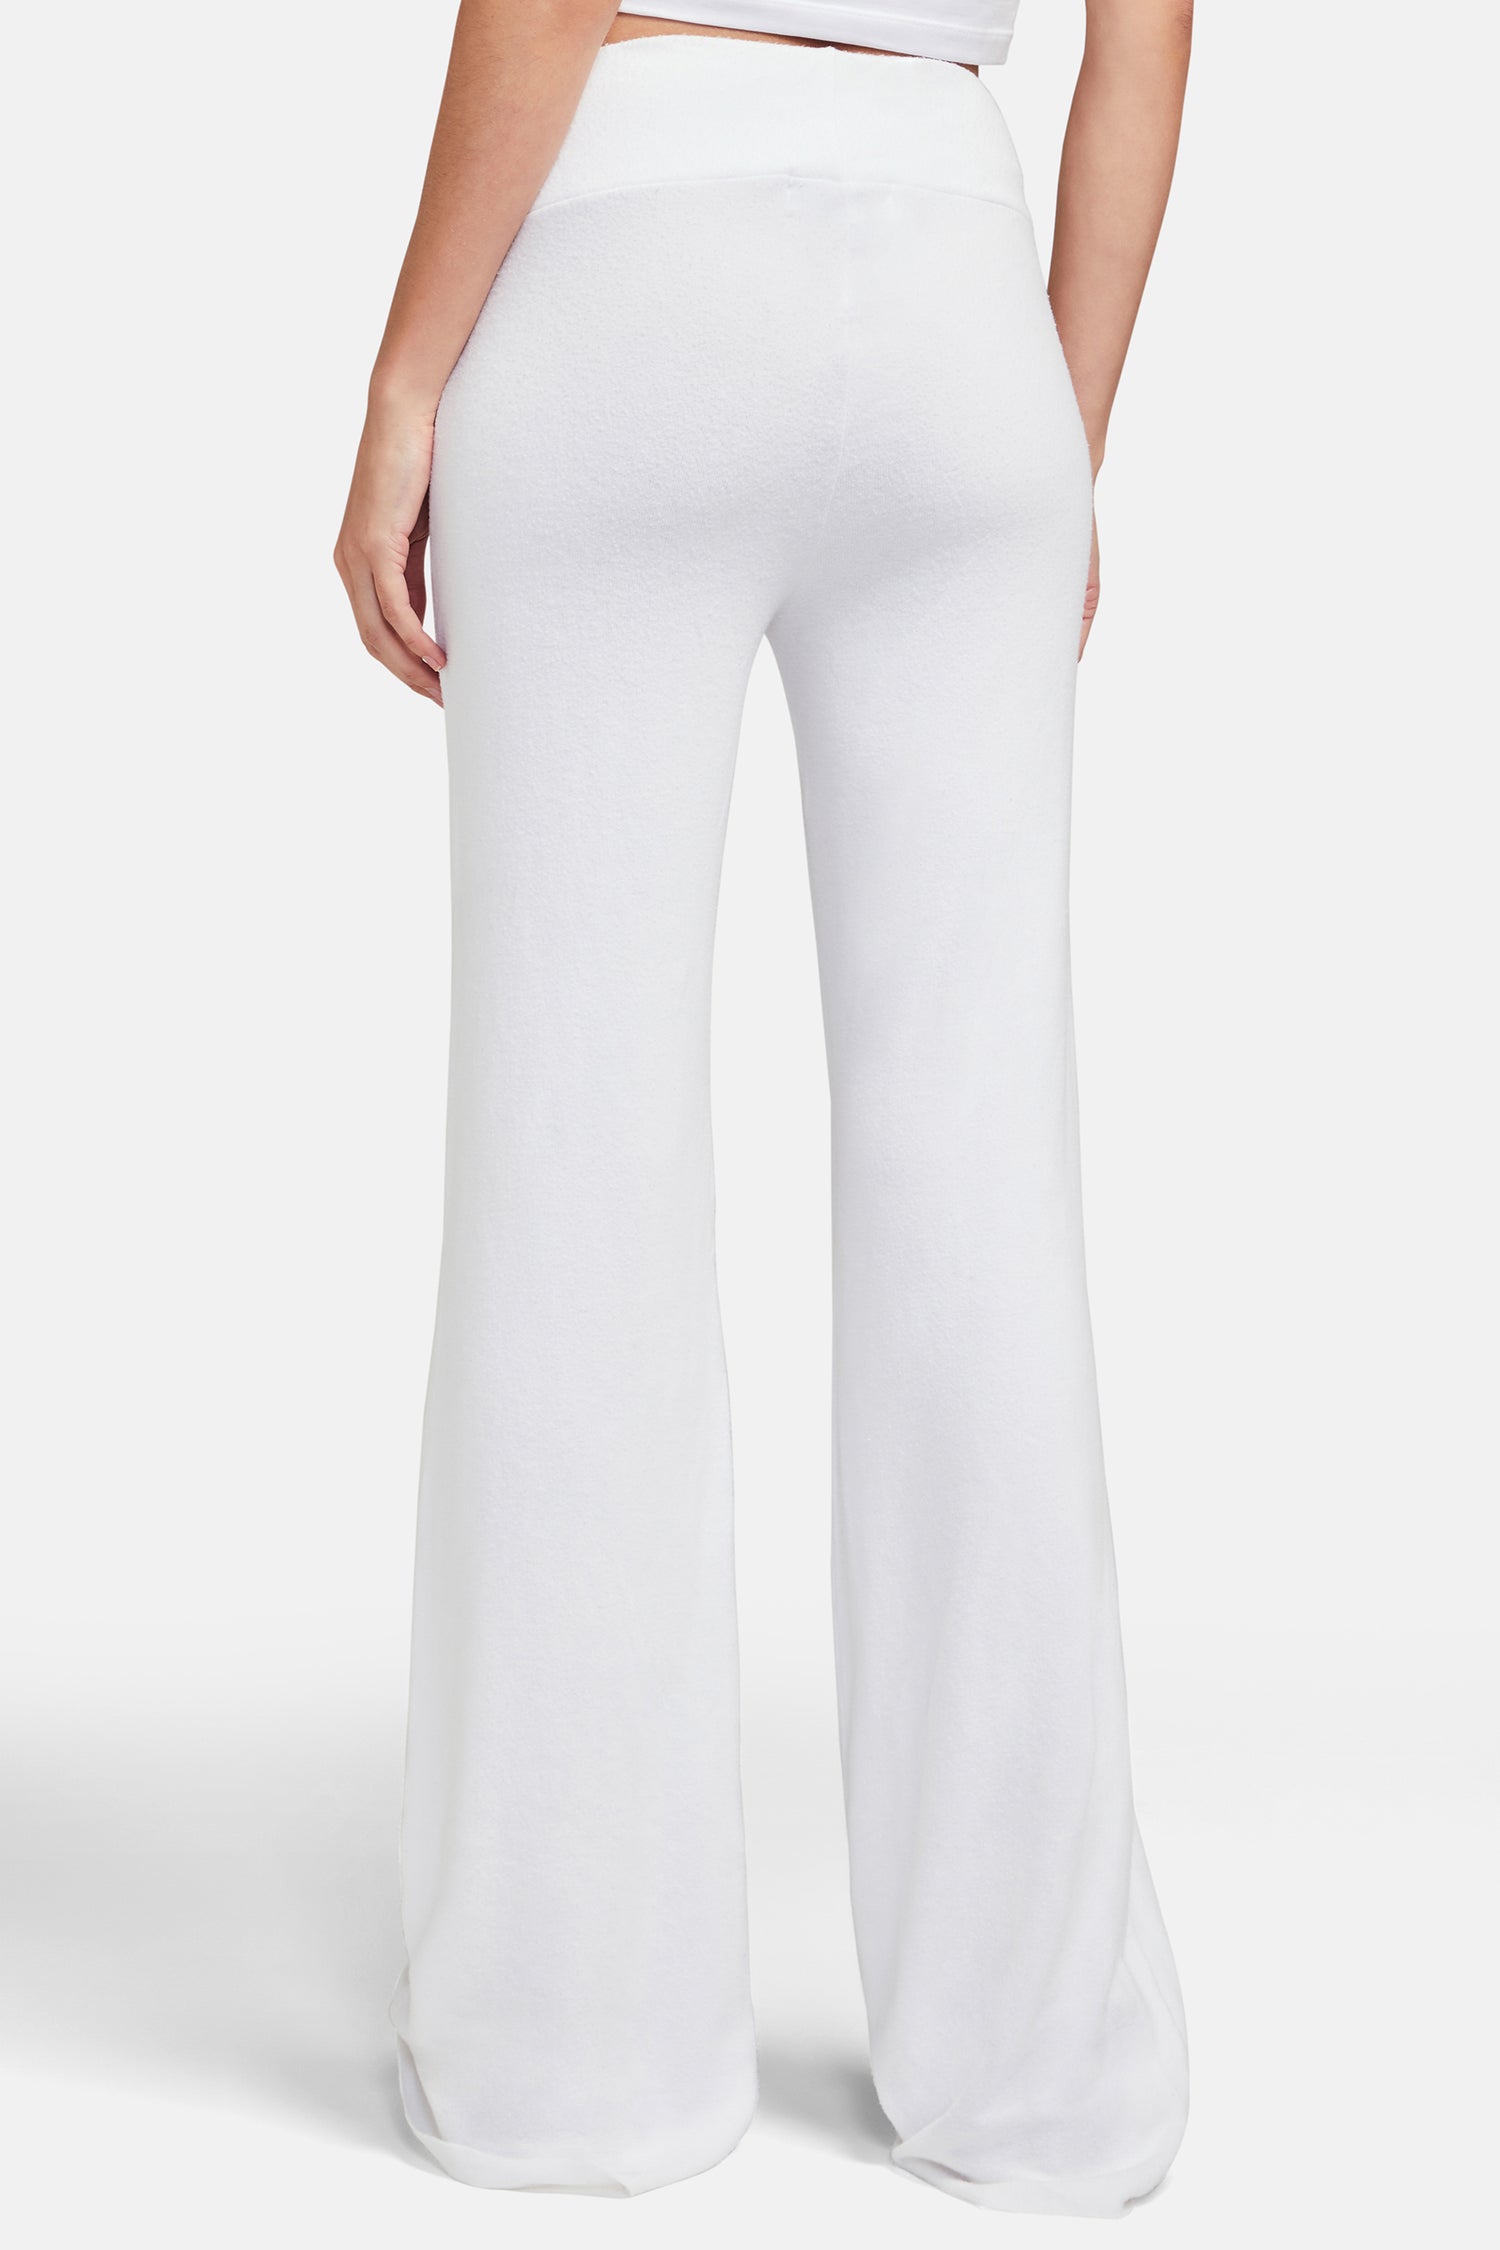 Wildfox, Pants & Jumpsuits, Wildfox Tennis Club Pants In Clean White Nwt